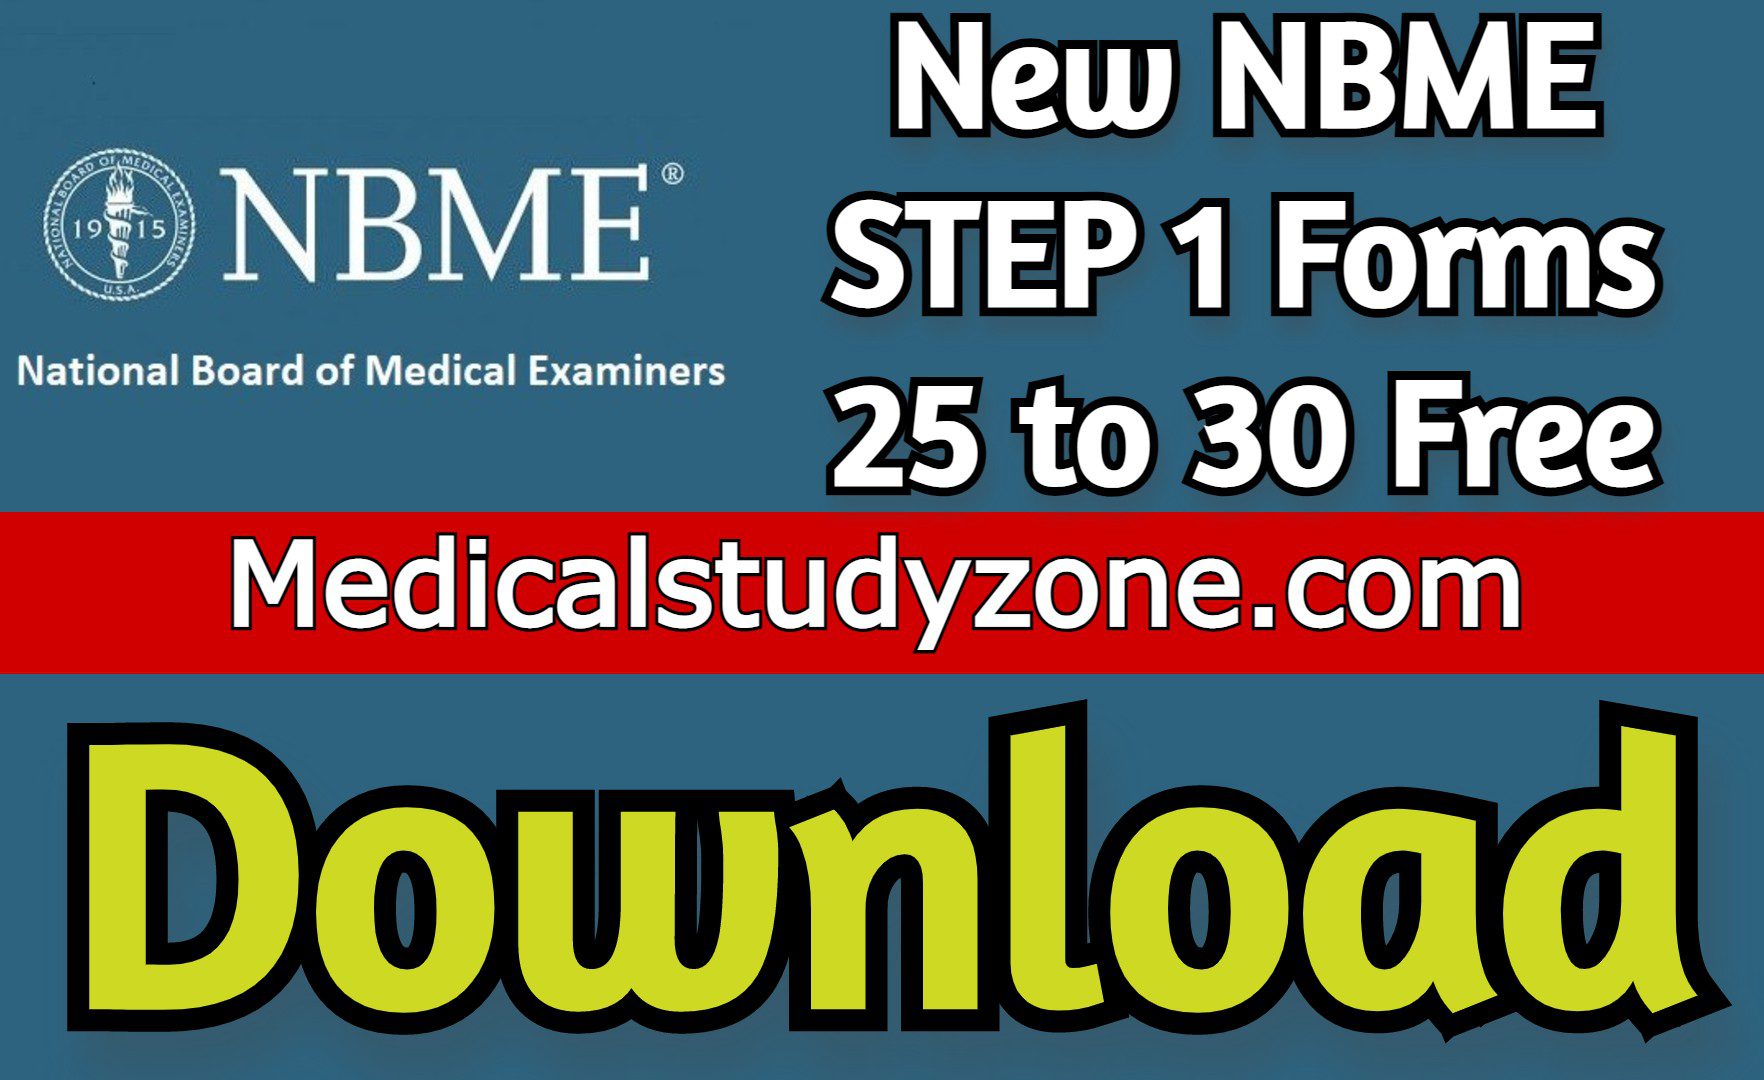 Download New NBME STEP 1 2022 Forms 25 to 30 Free